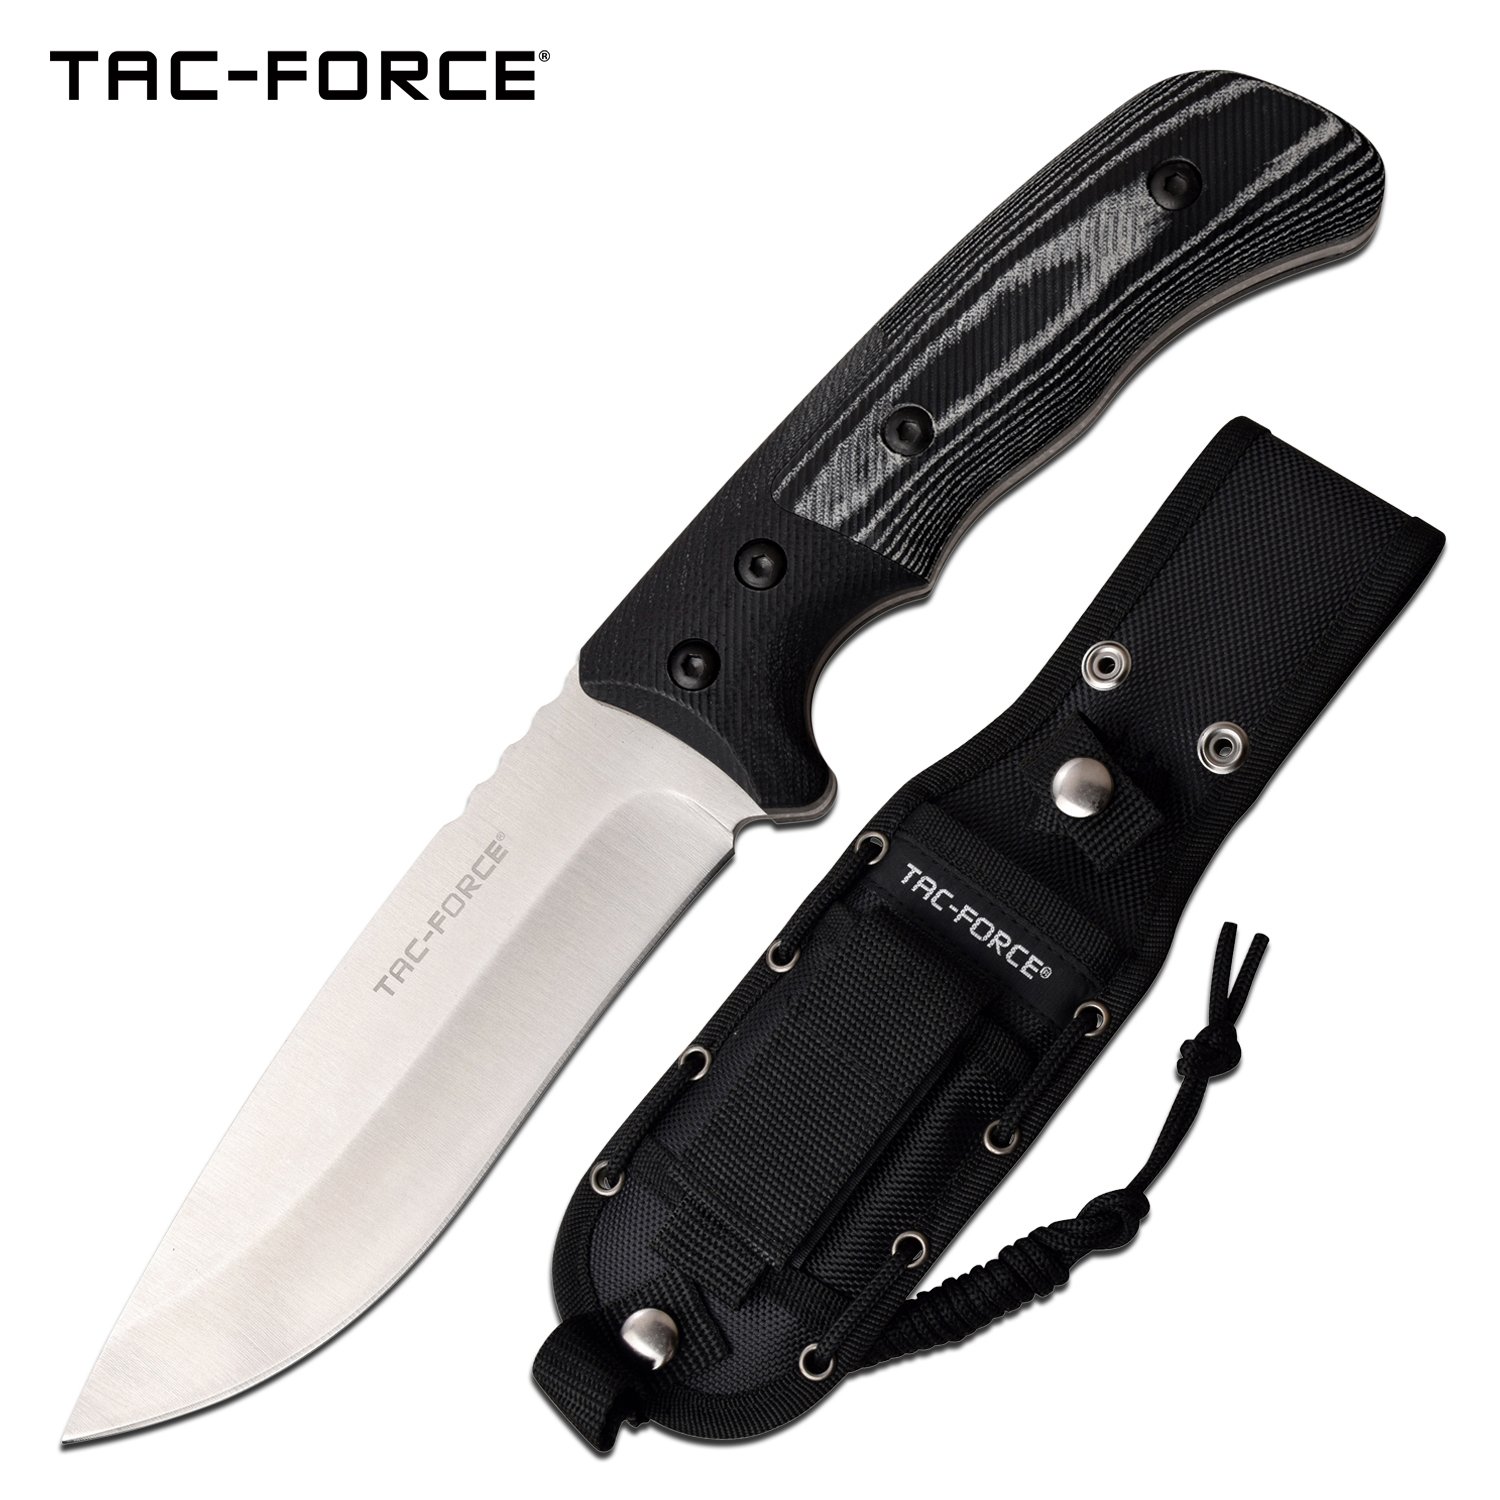 Tactical Knife 9.9in Overall Tac-Force Black Military Combat Blade + Molle Sheath